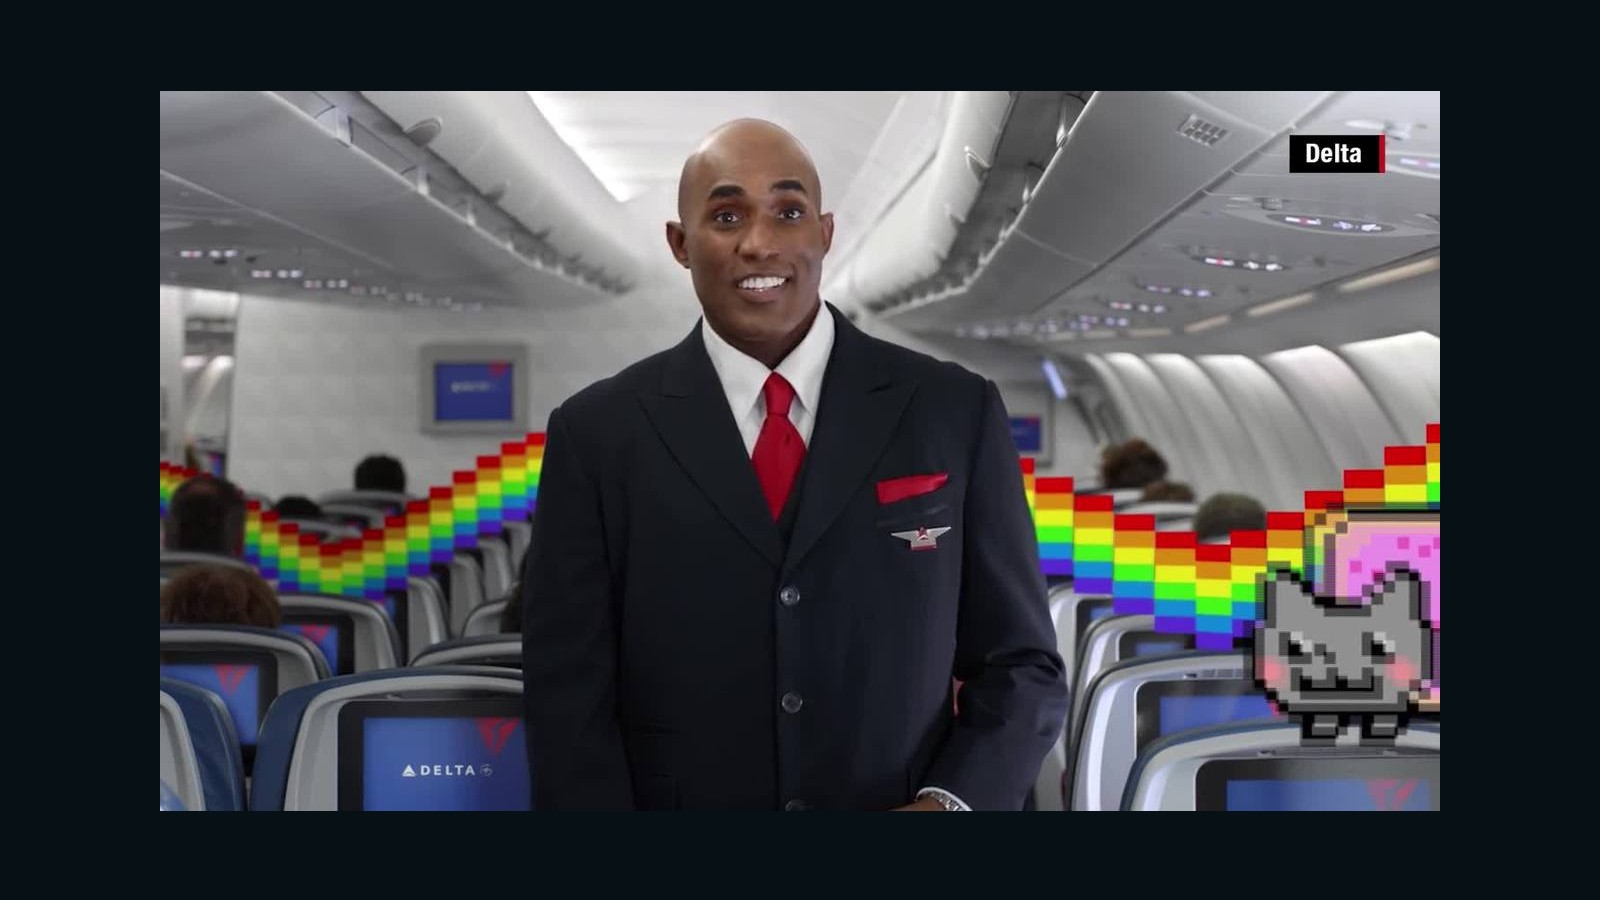 Delta's new safety video is memetastic CNN Video